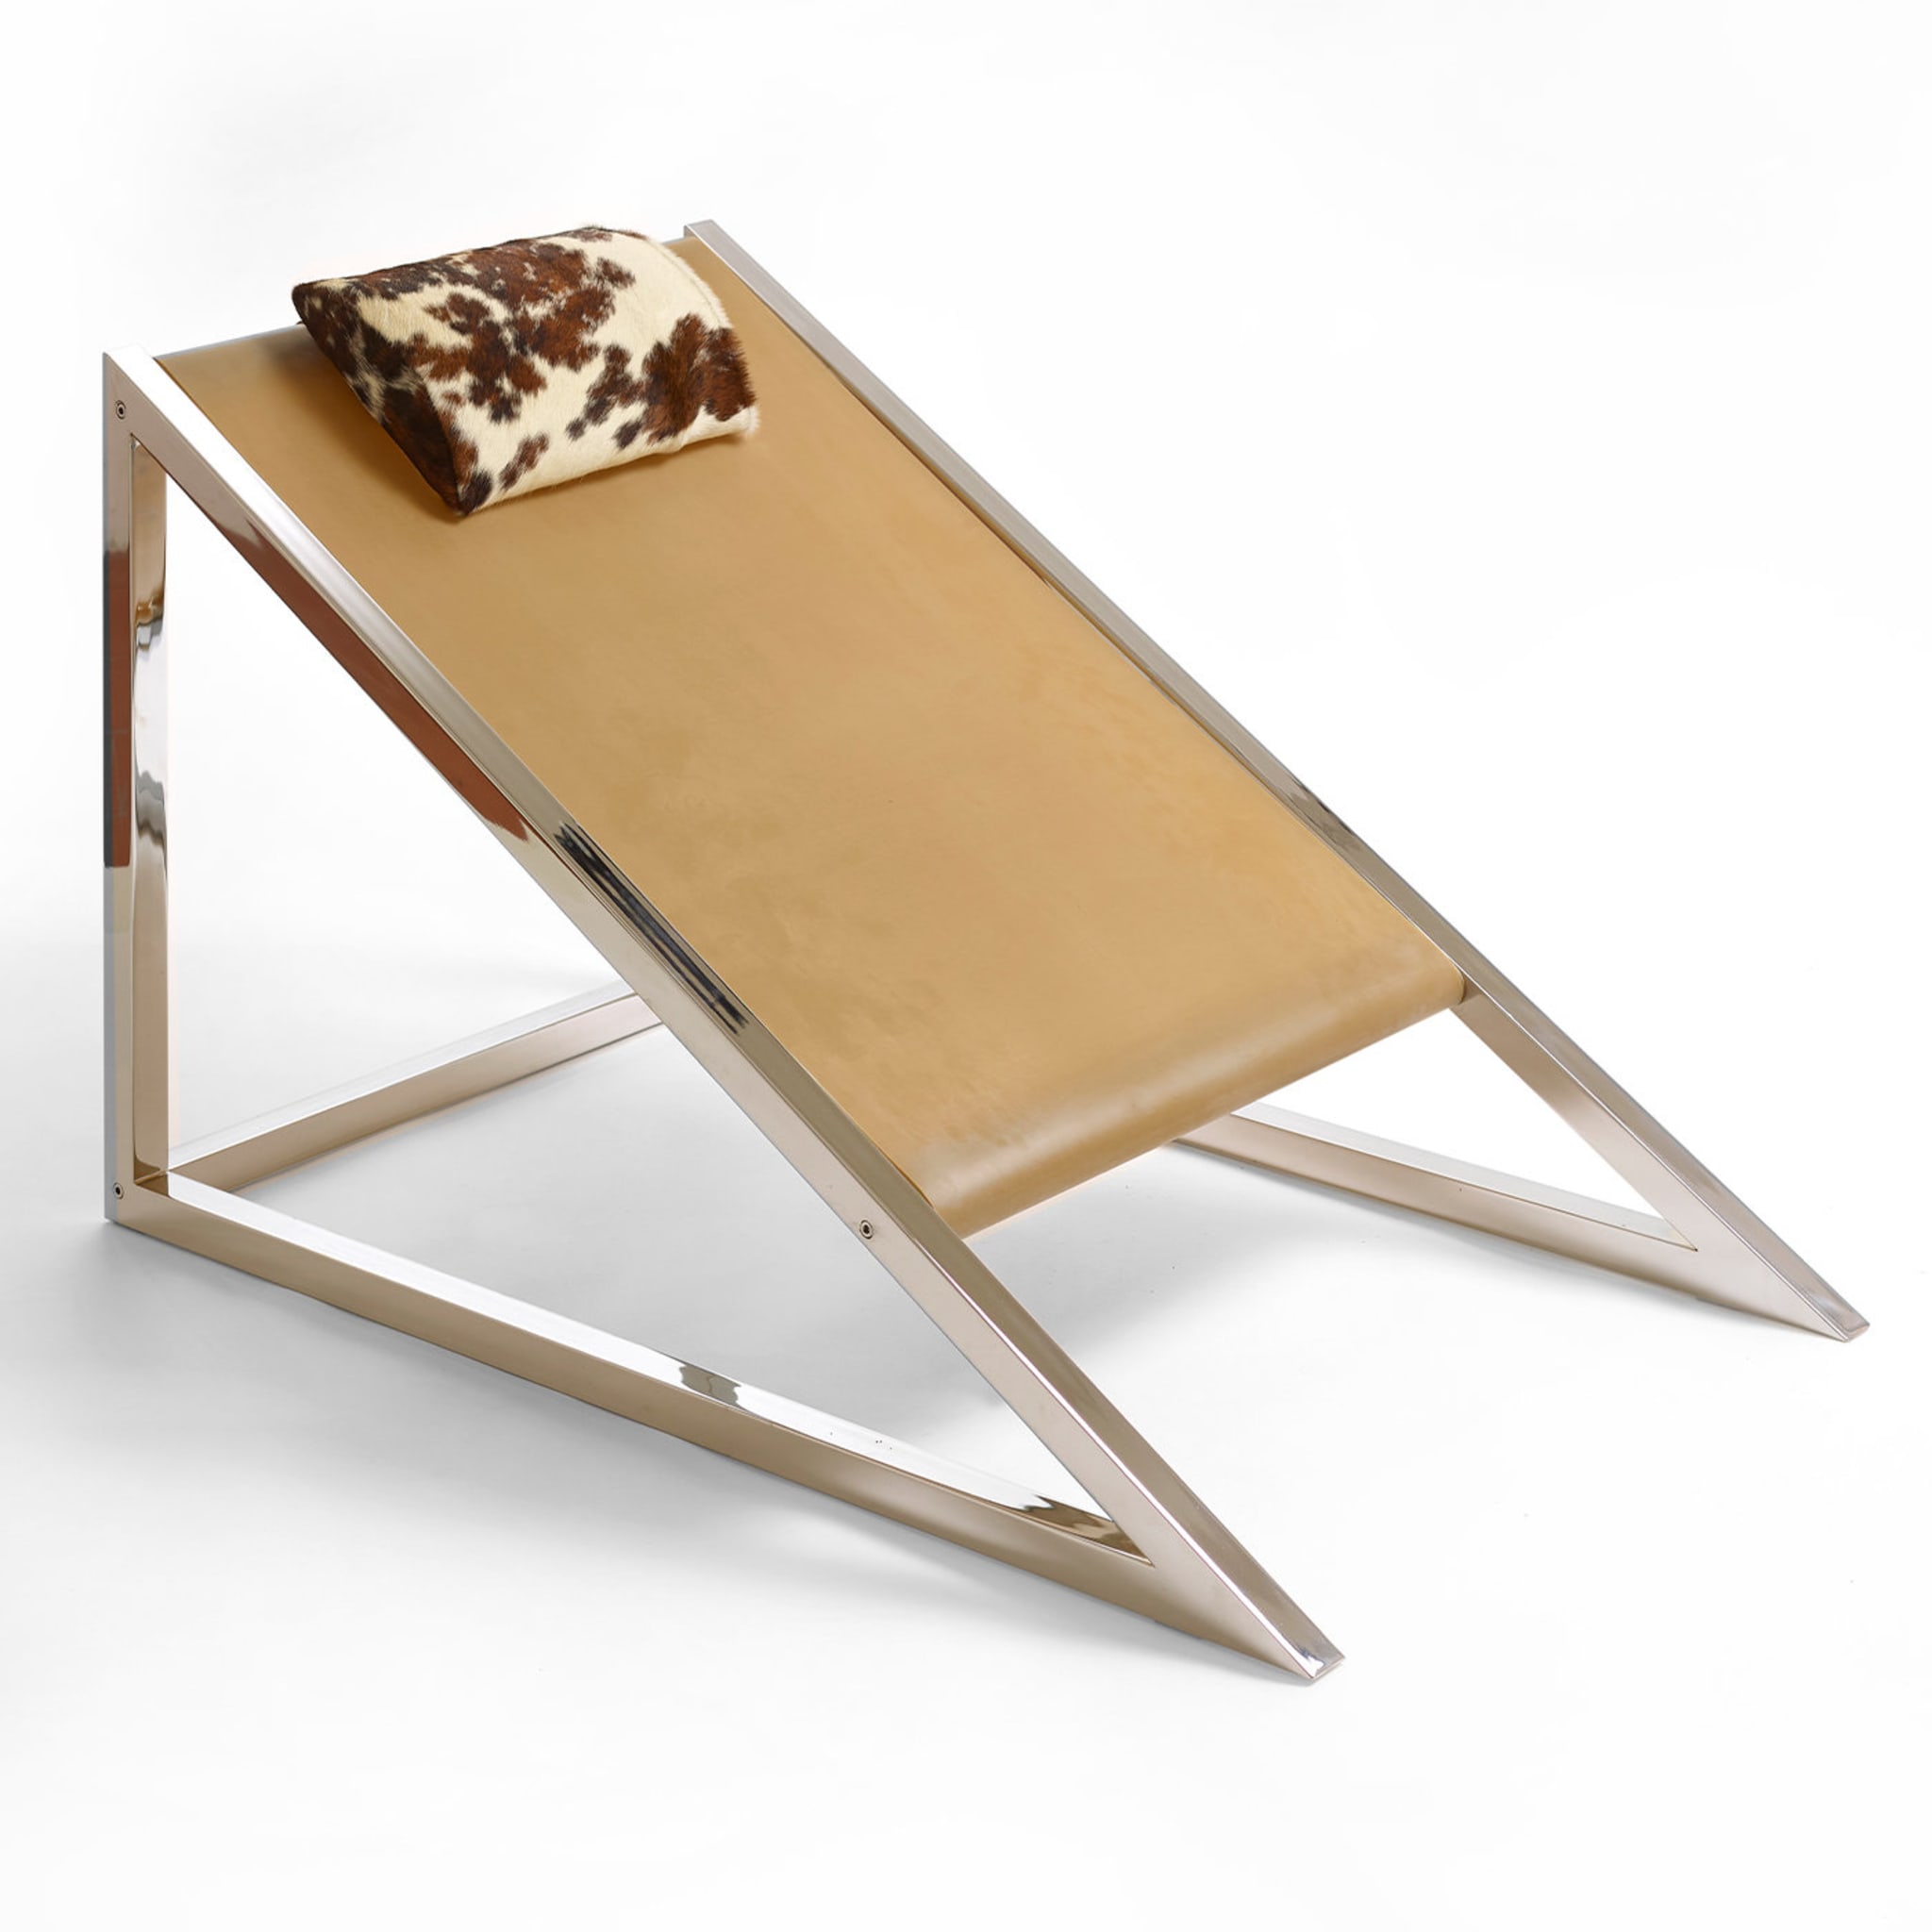 Mies Armchair by Archizoom - Alternative view 4